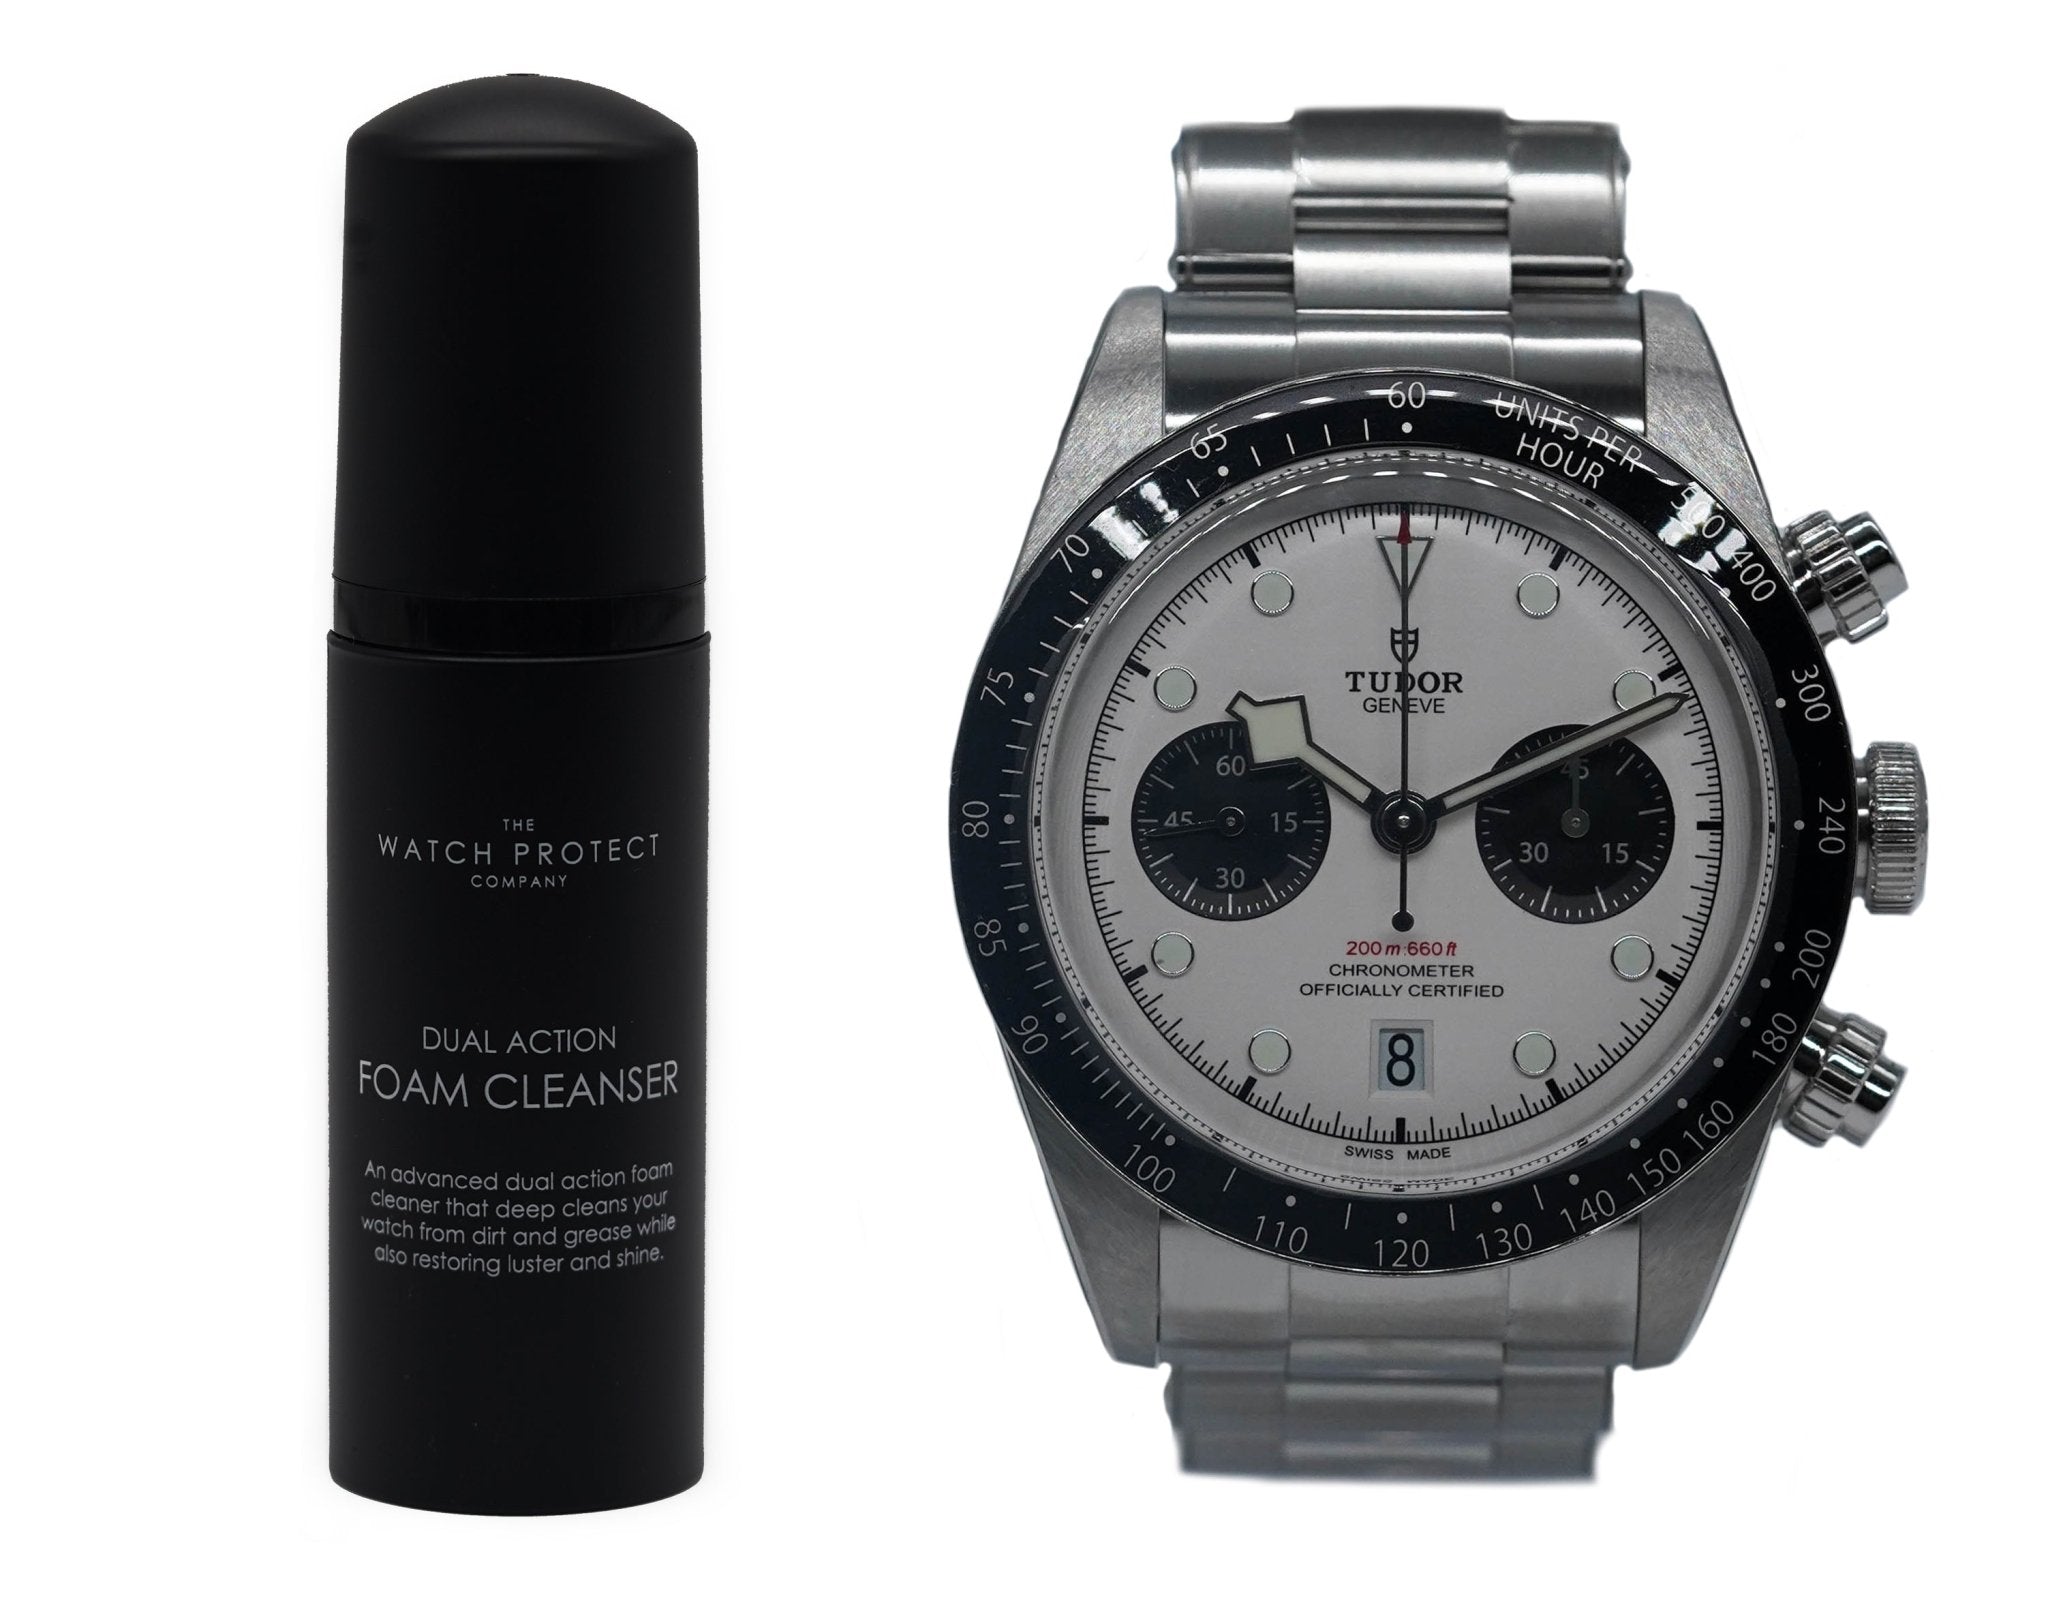 DUAL ACTION FOAM CLEANER & TUDOR BLACK BAY CHRONO 41 - TIER 3 - WATCH PROTECTION KIT BUNDLE - The Watch Protect Company